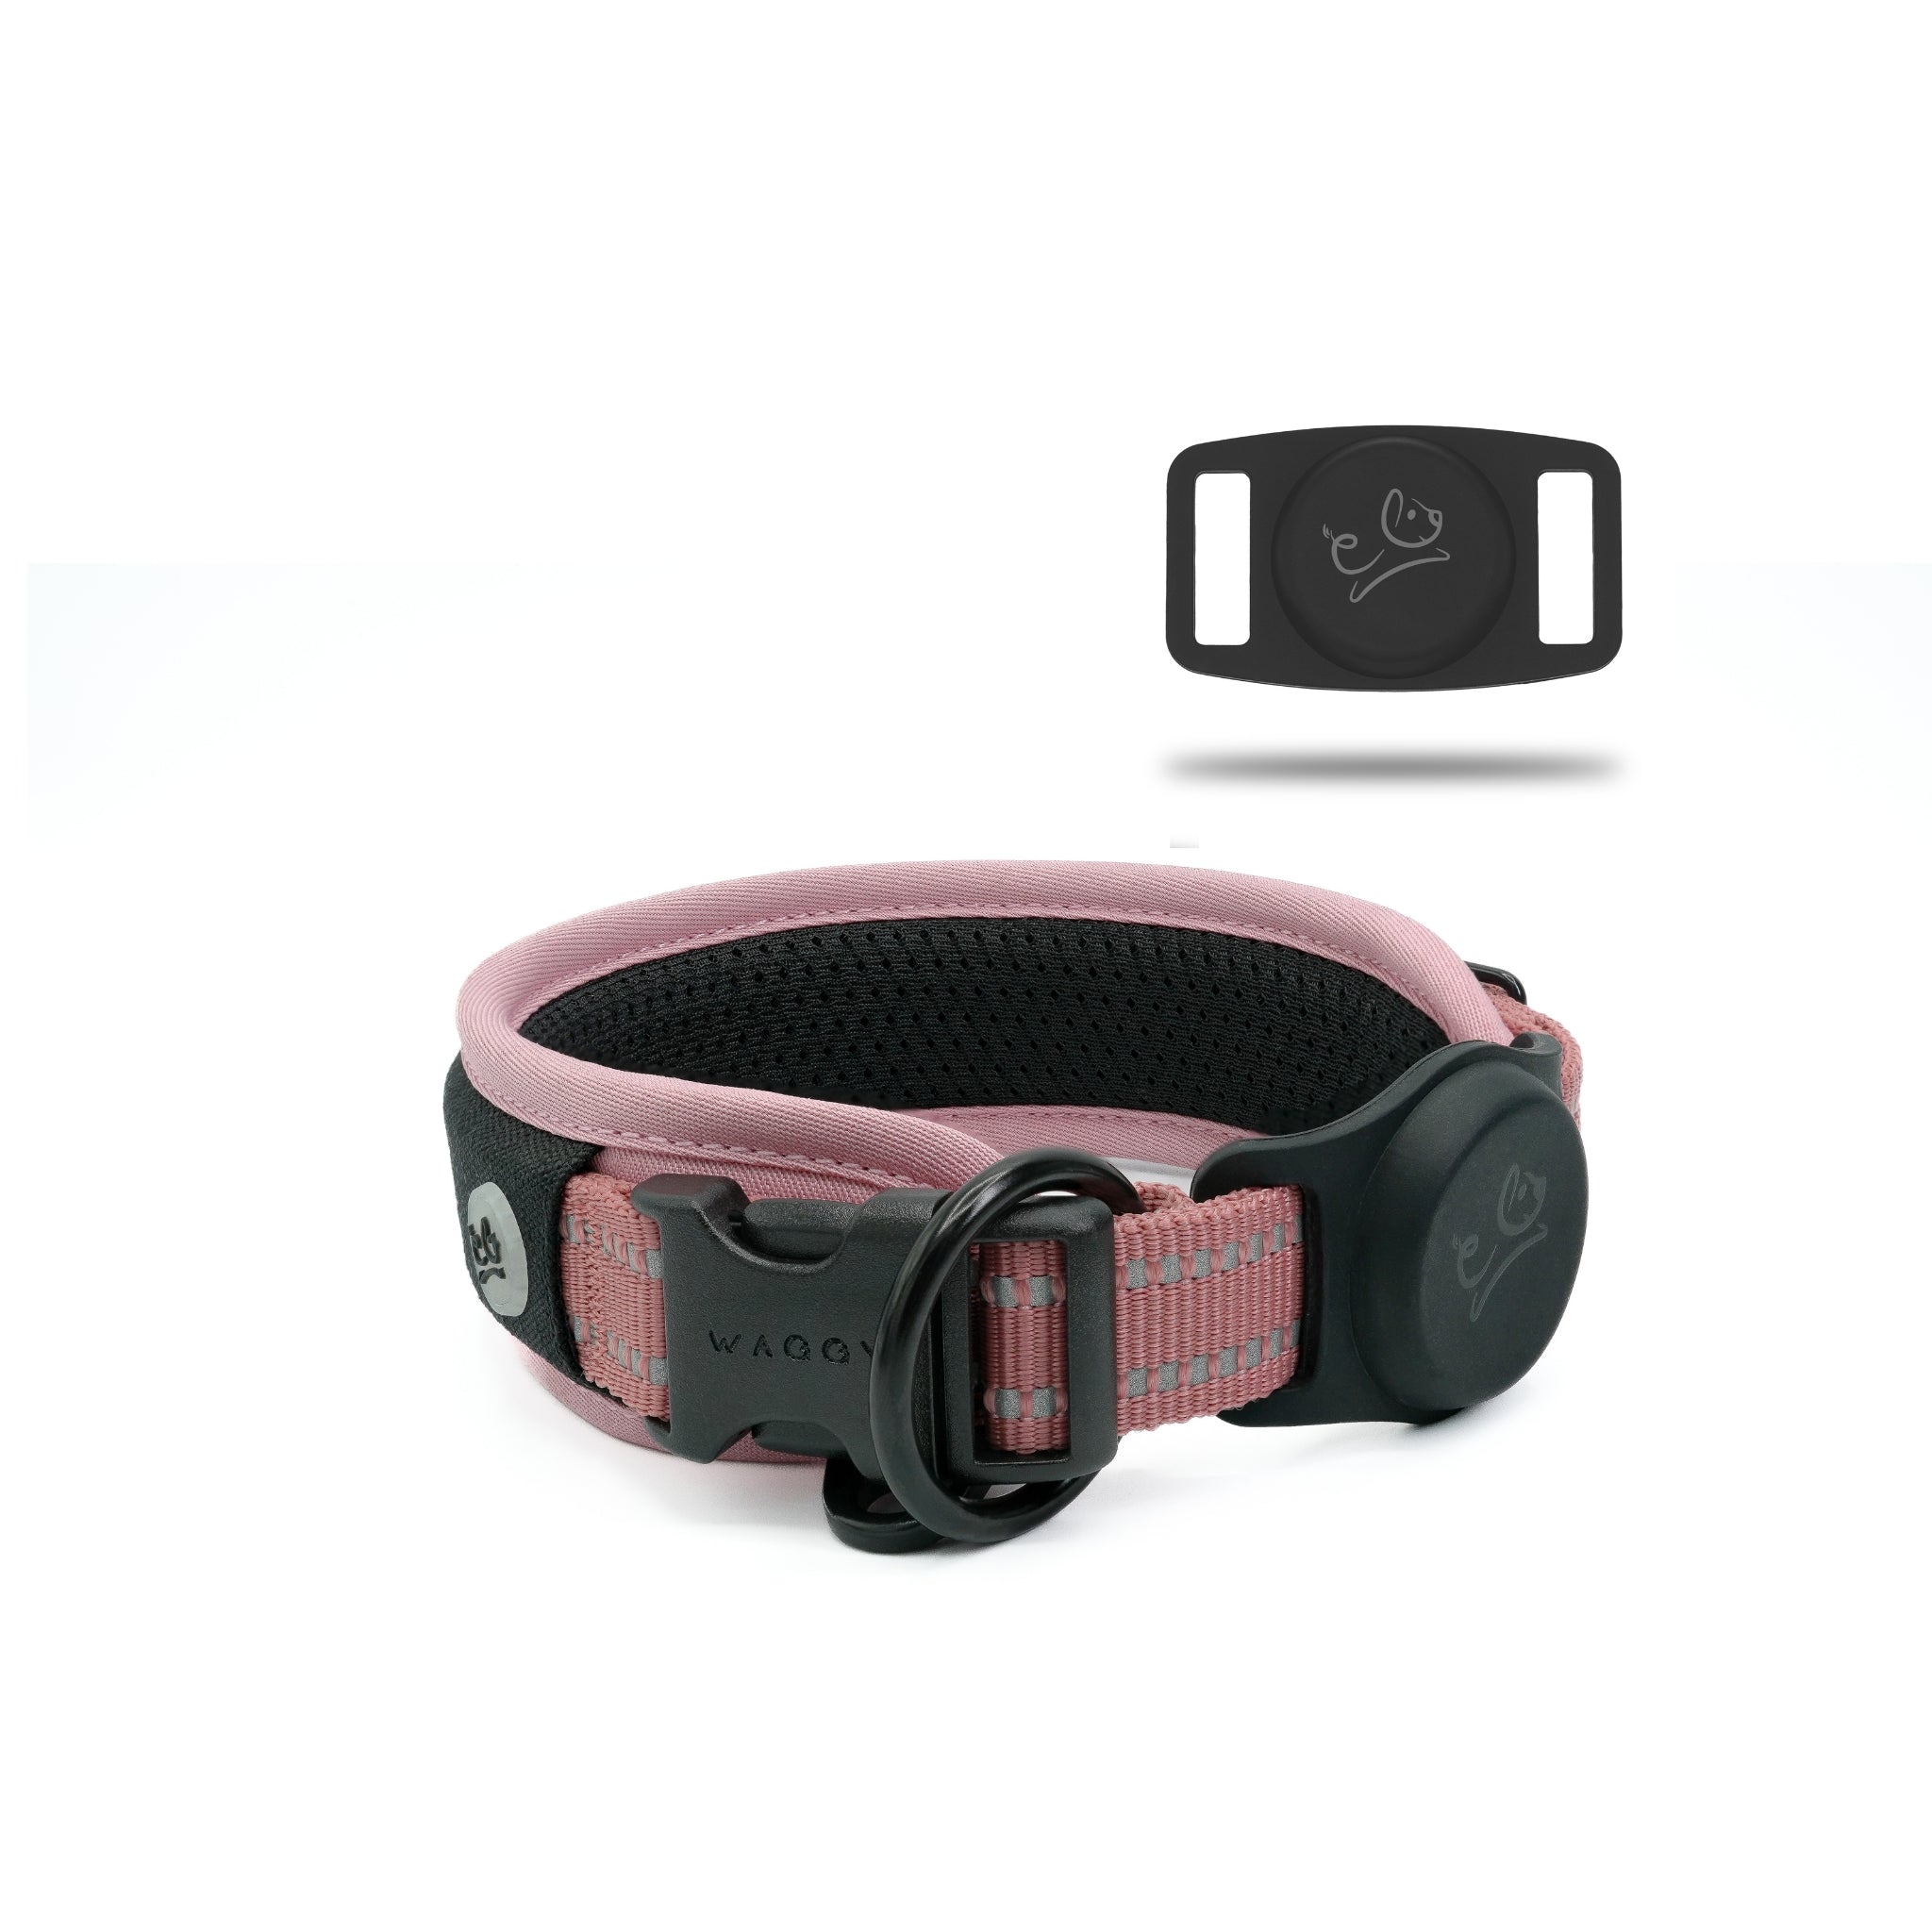 Pink Air Mesh dog collar in the center showing details of the 3M reflective stitching & airtag holder attached to the collar. Airtag holder on the right corner with Waggy logo.